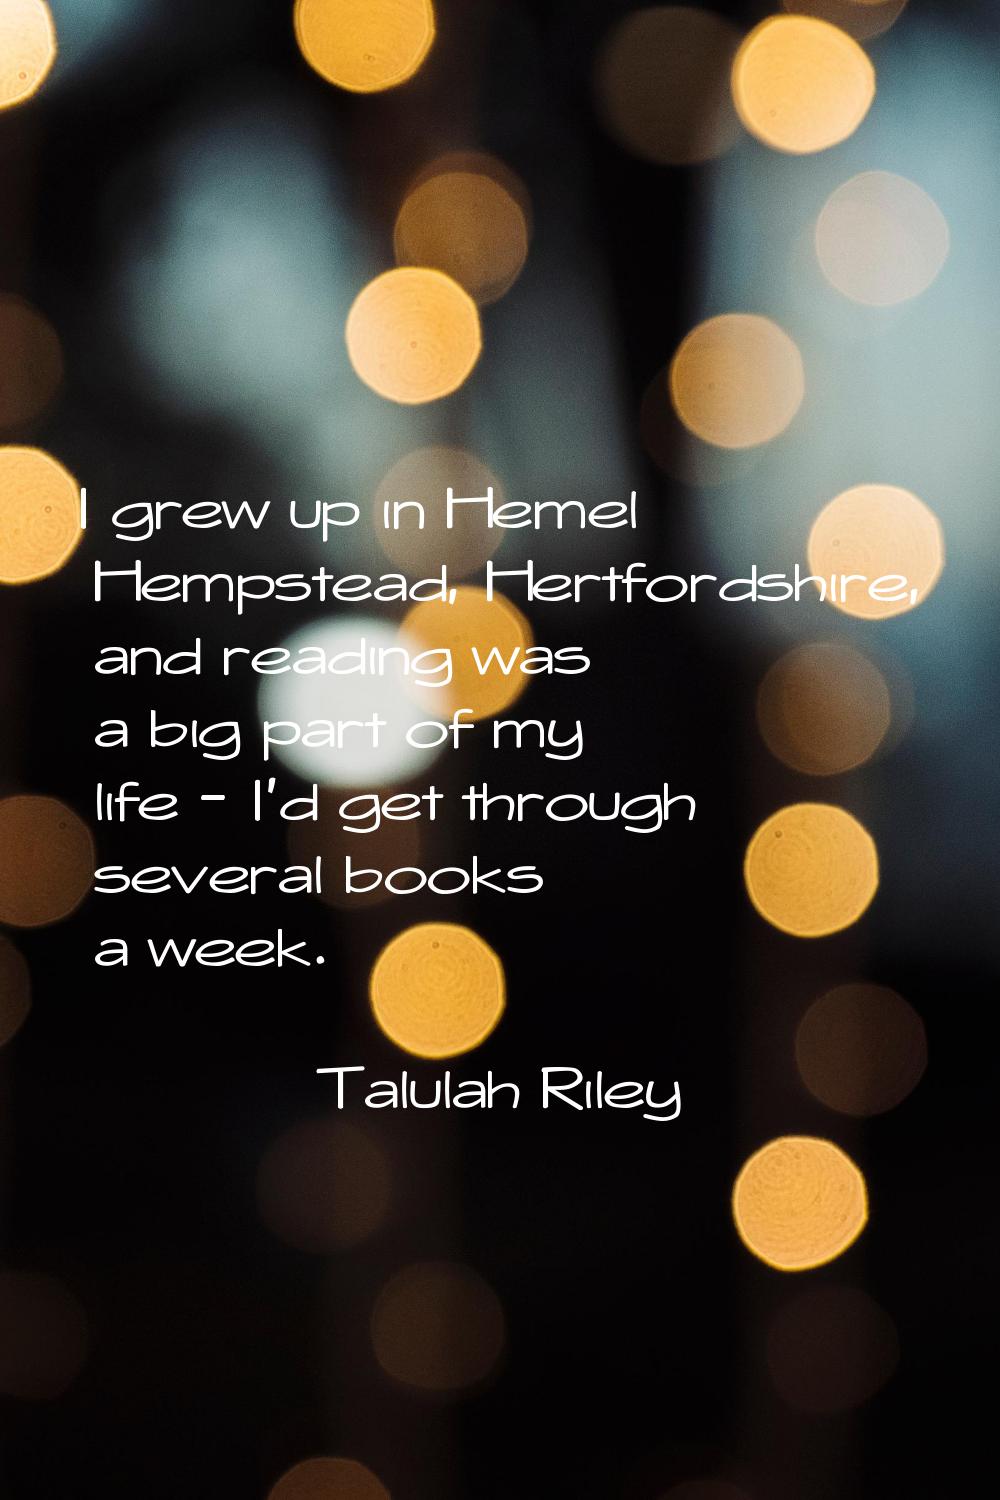 I grew up in Hemel Hempstead, Hertfordshire, and reading was a big part of my life - I'd get throug